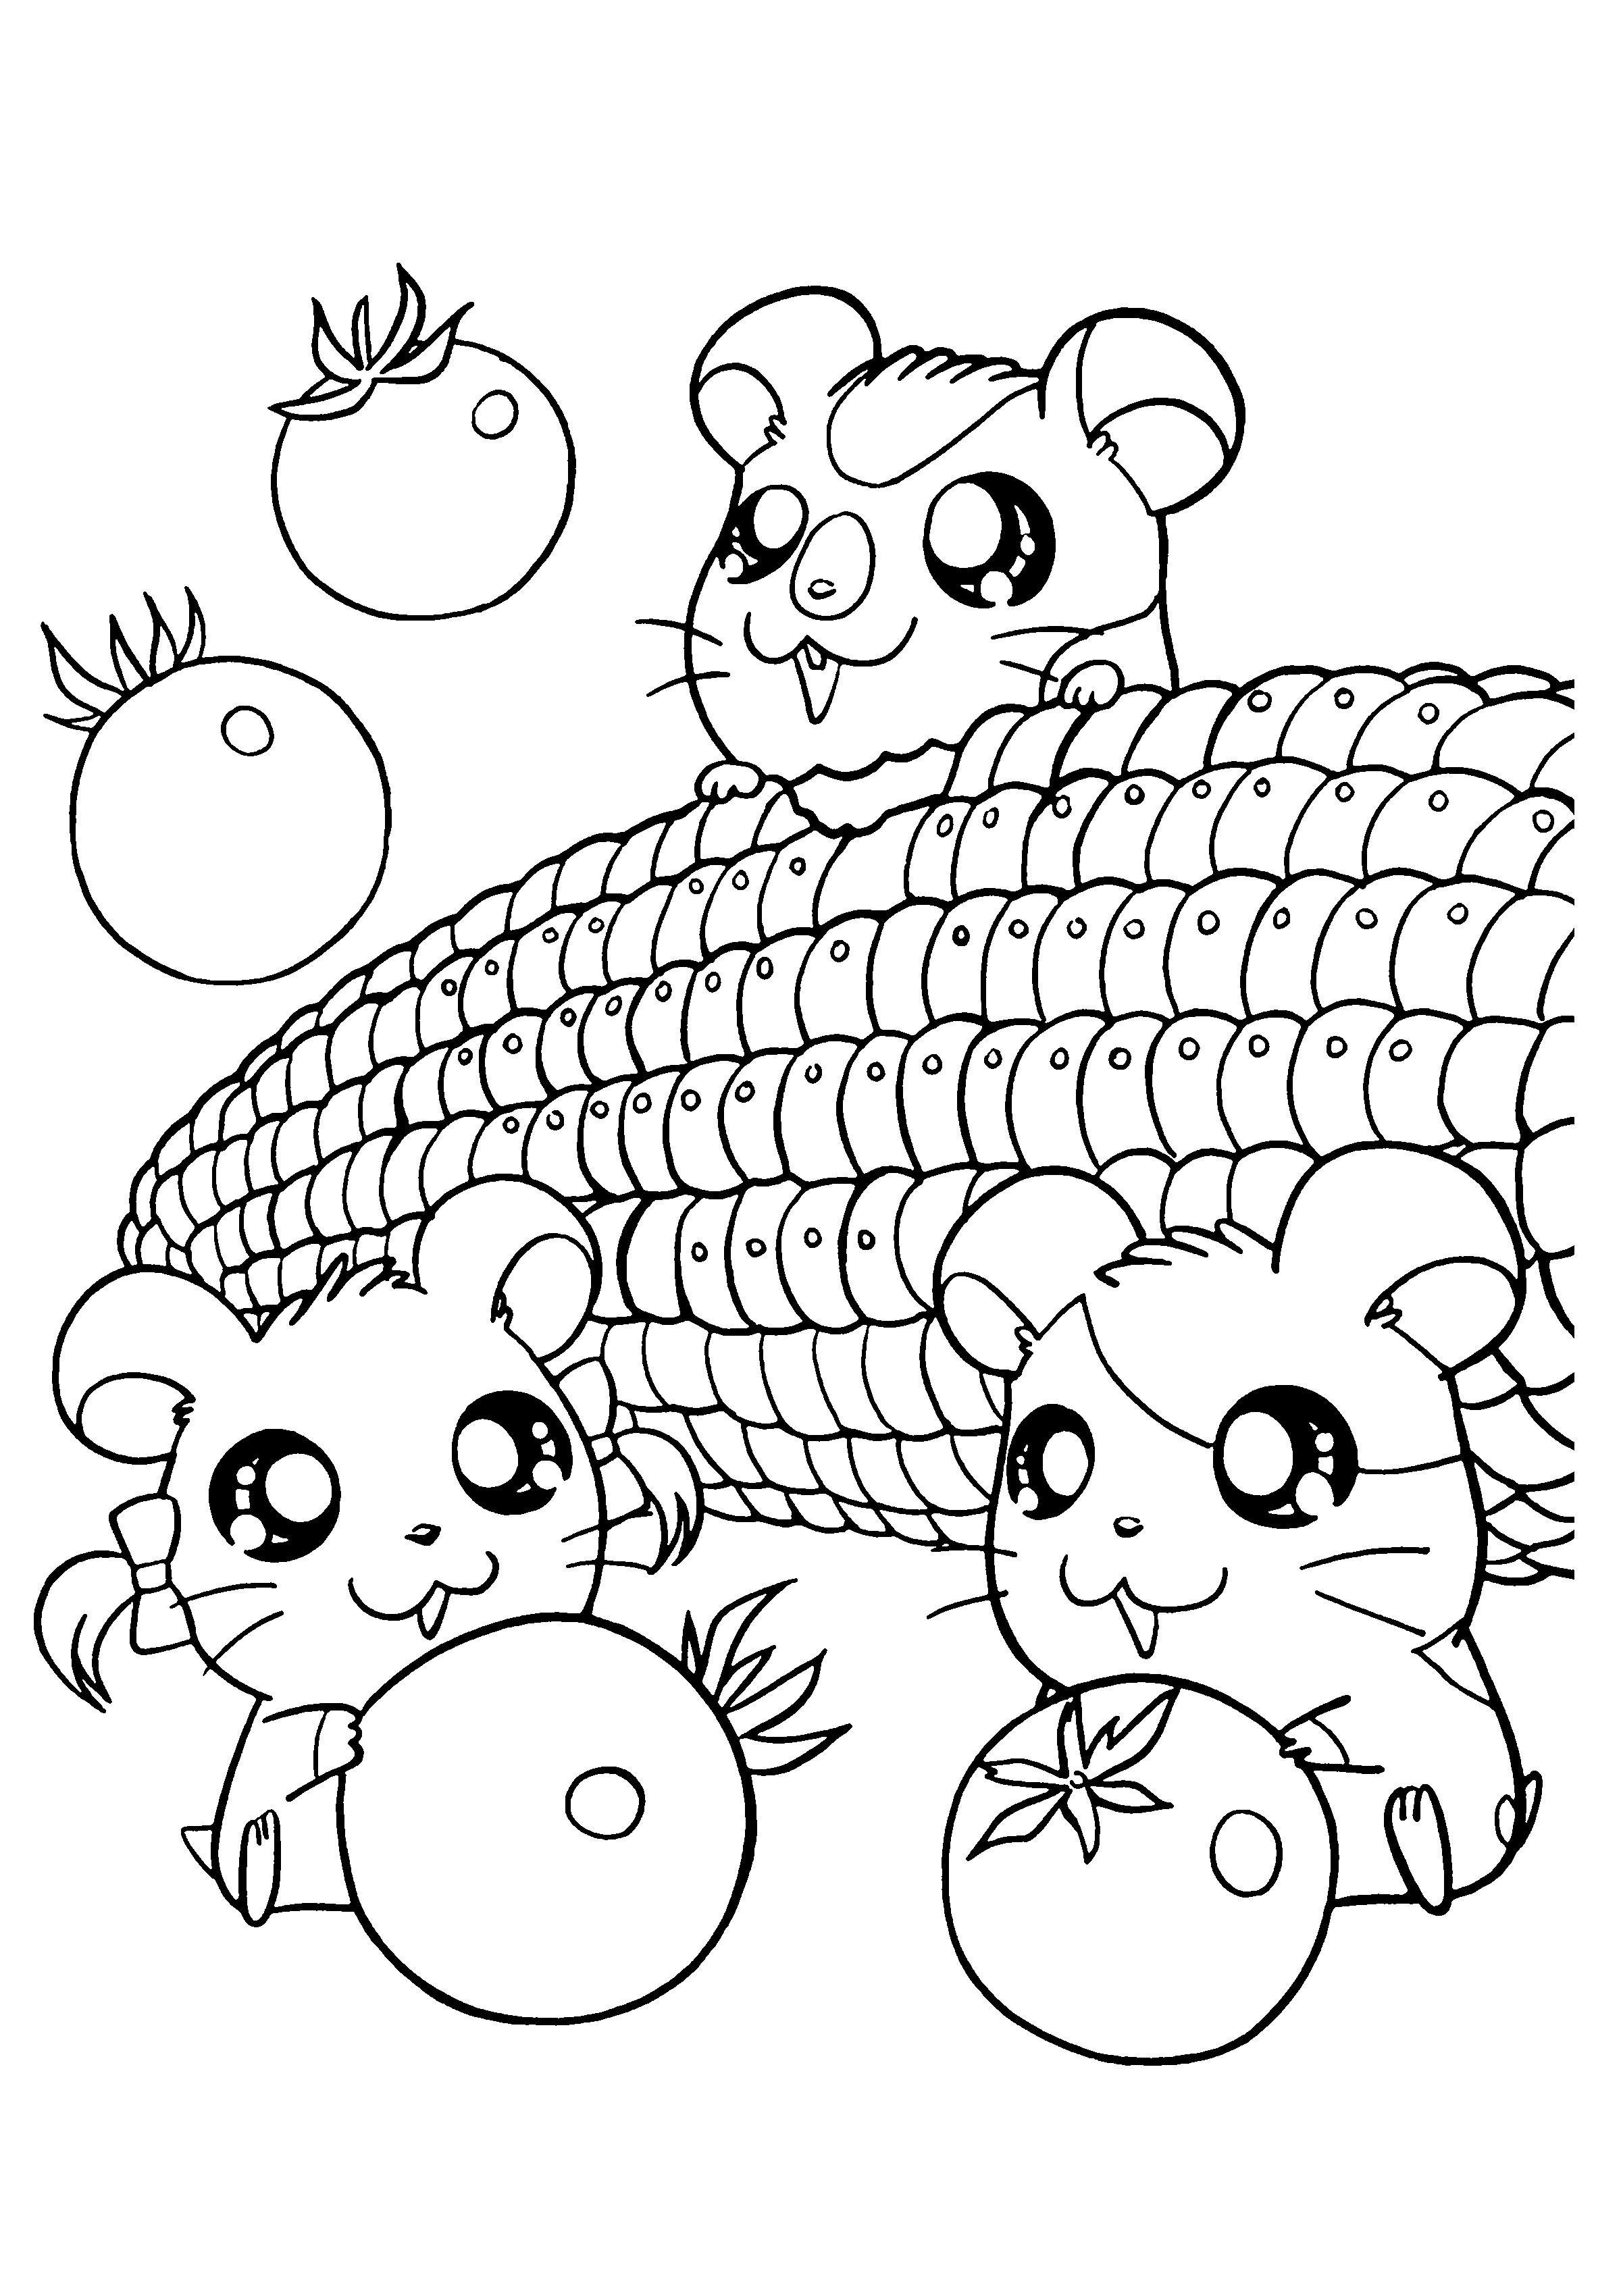 Free Hamster Coloring Pages at Free printable